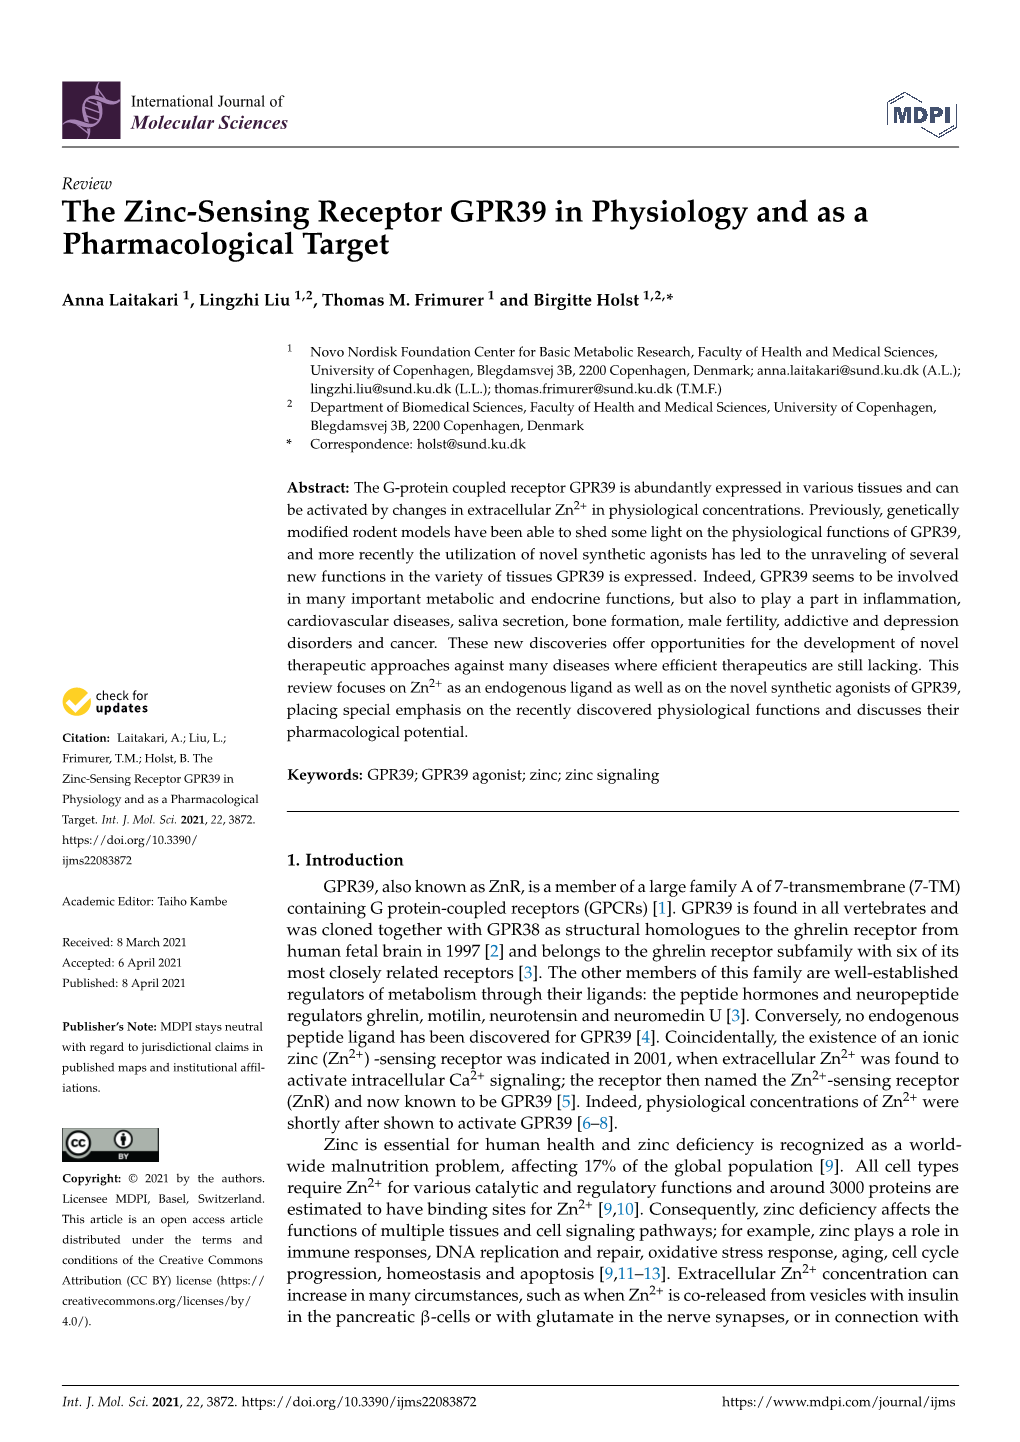 The Zinc-Sensing Receptor GPR39 in Physiology and As a Pharmacological Target